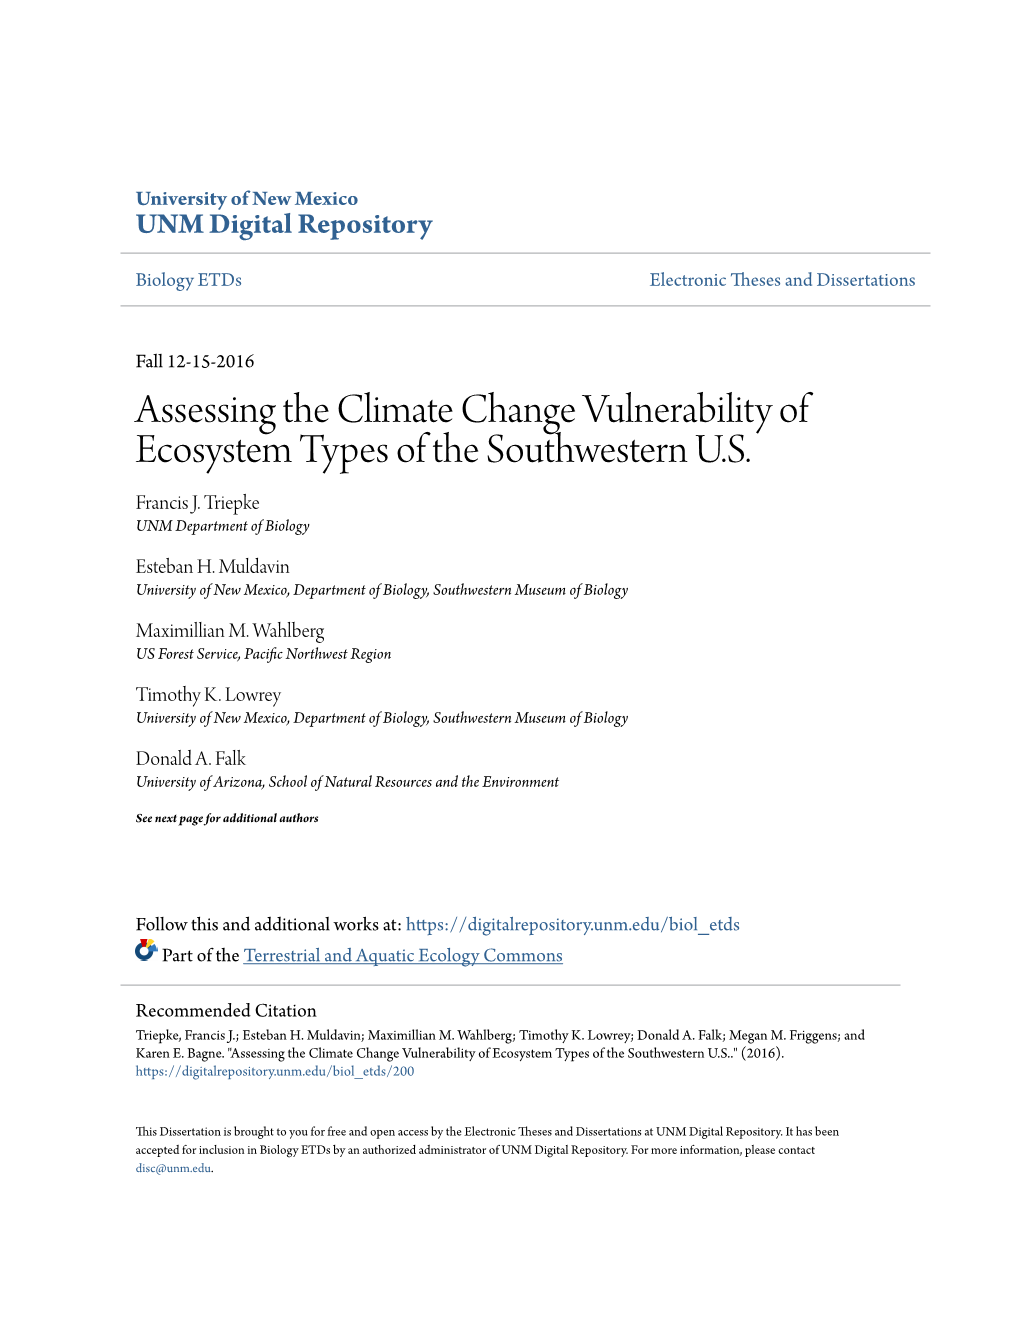 Assessing the Climate Change Vulnerability of Ecosystem Types of the Southwestern U.S